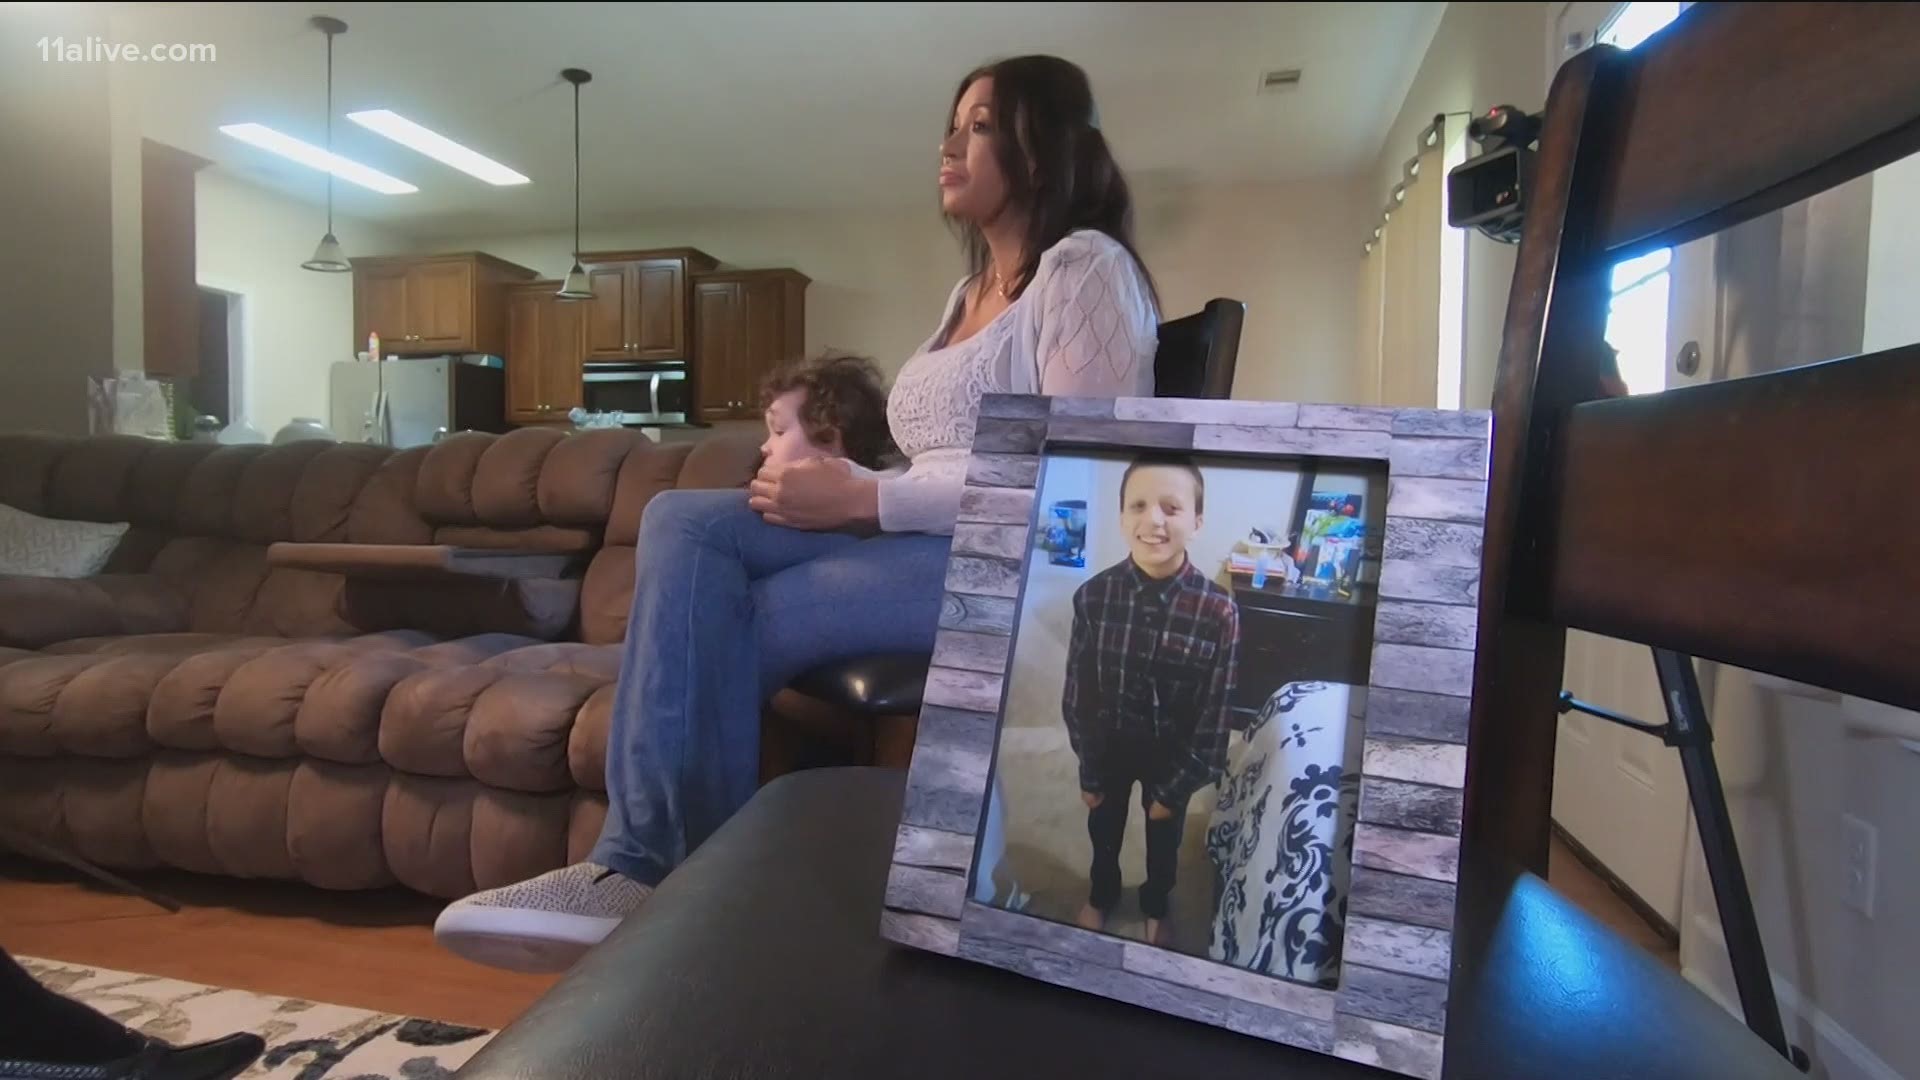 #KeepingBradley is a part of 11Alive's series investigating the challenges and systemic gaps that cause parents to abandon their children to state custody.